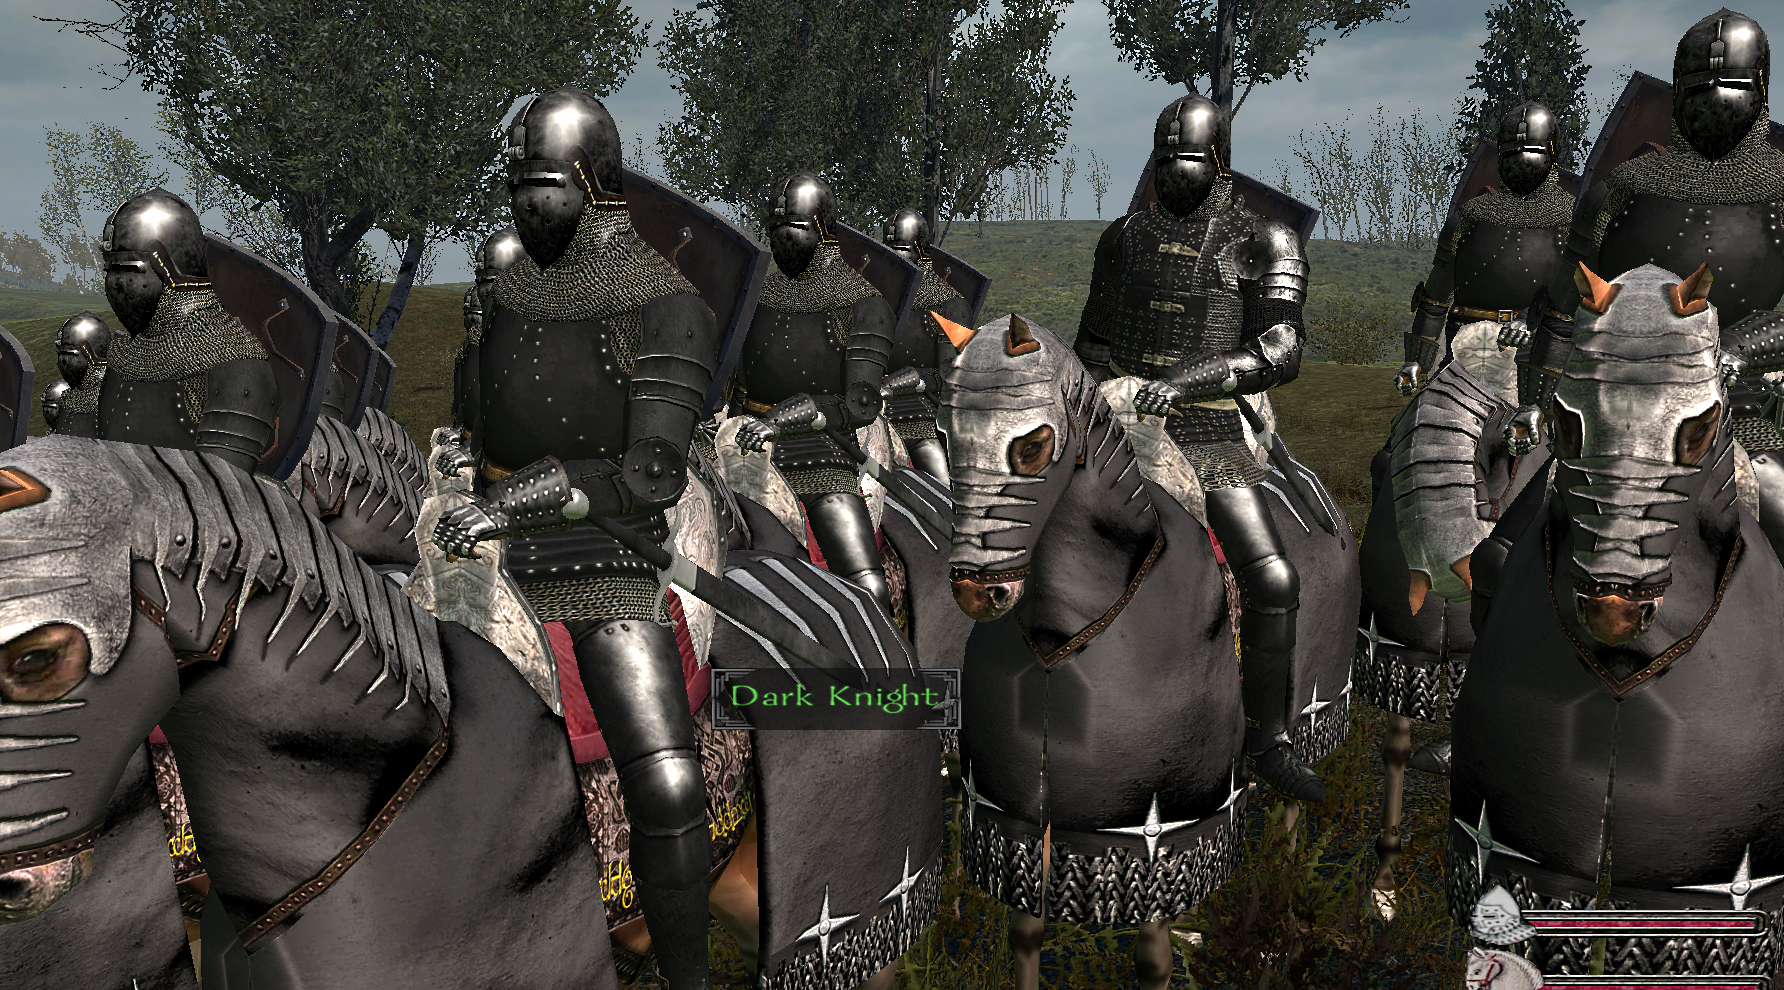 Warband native. Маунт энд блейд 2 рыцарь. Mount and Blade Warband темные Рыцари. Маунт энд блейд 2 Bannerlord Рыцари. Mount and Blade Рыцари.